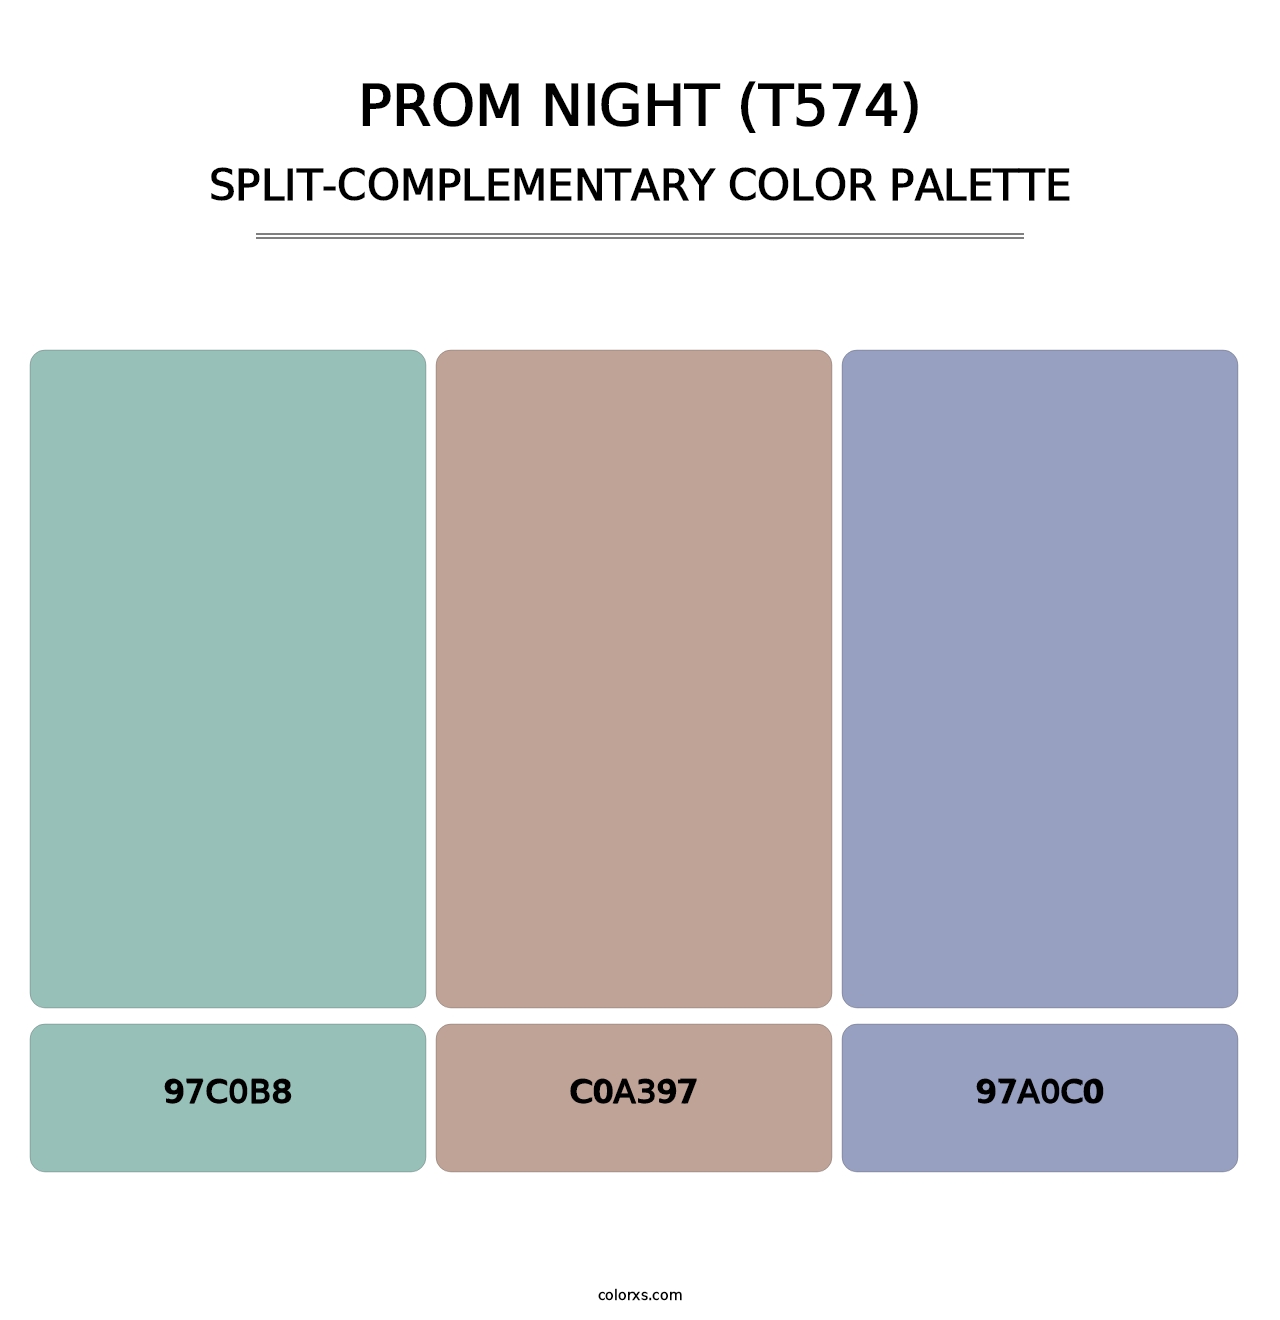 Prom Night (T574) - Split-Complementary Color Palette